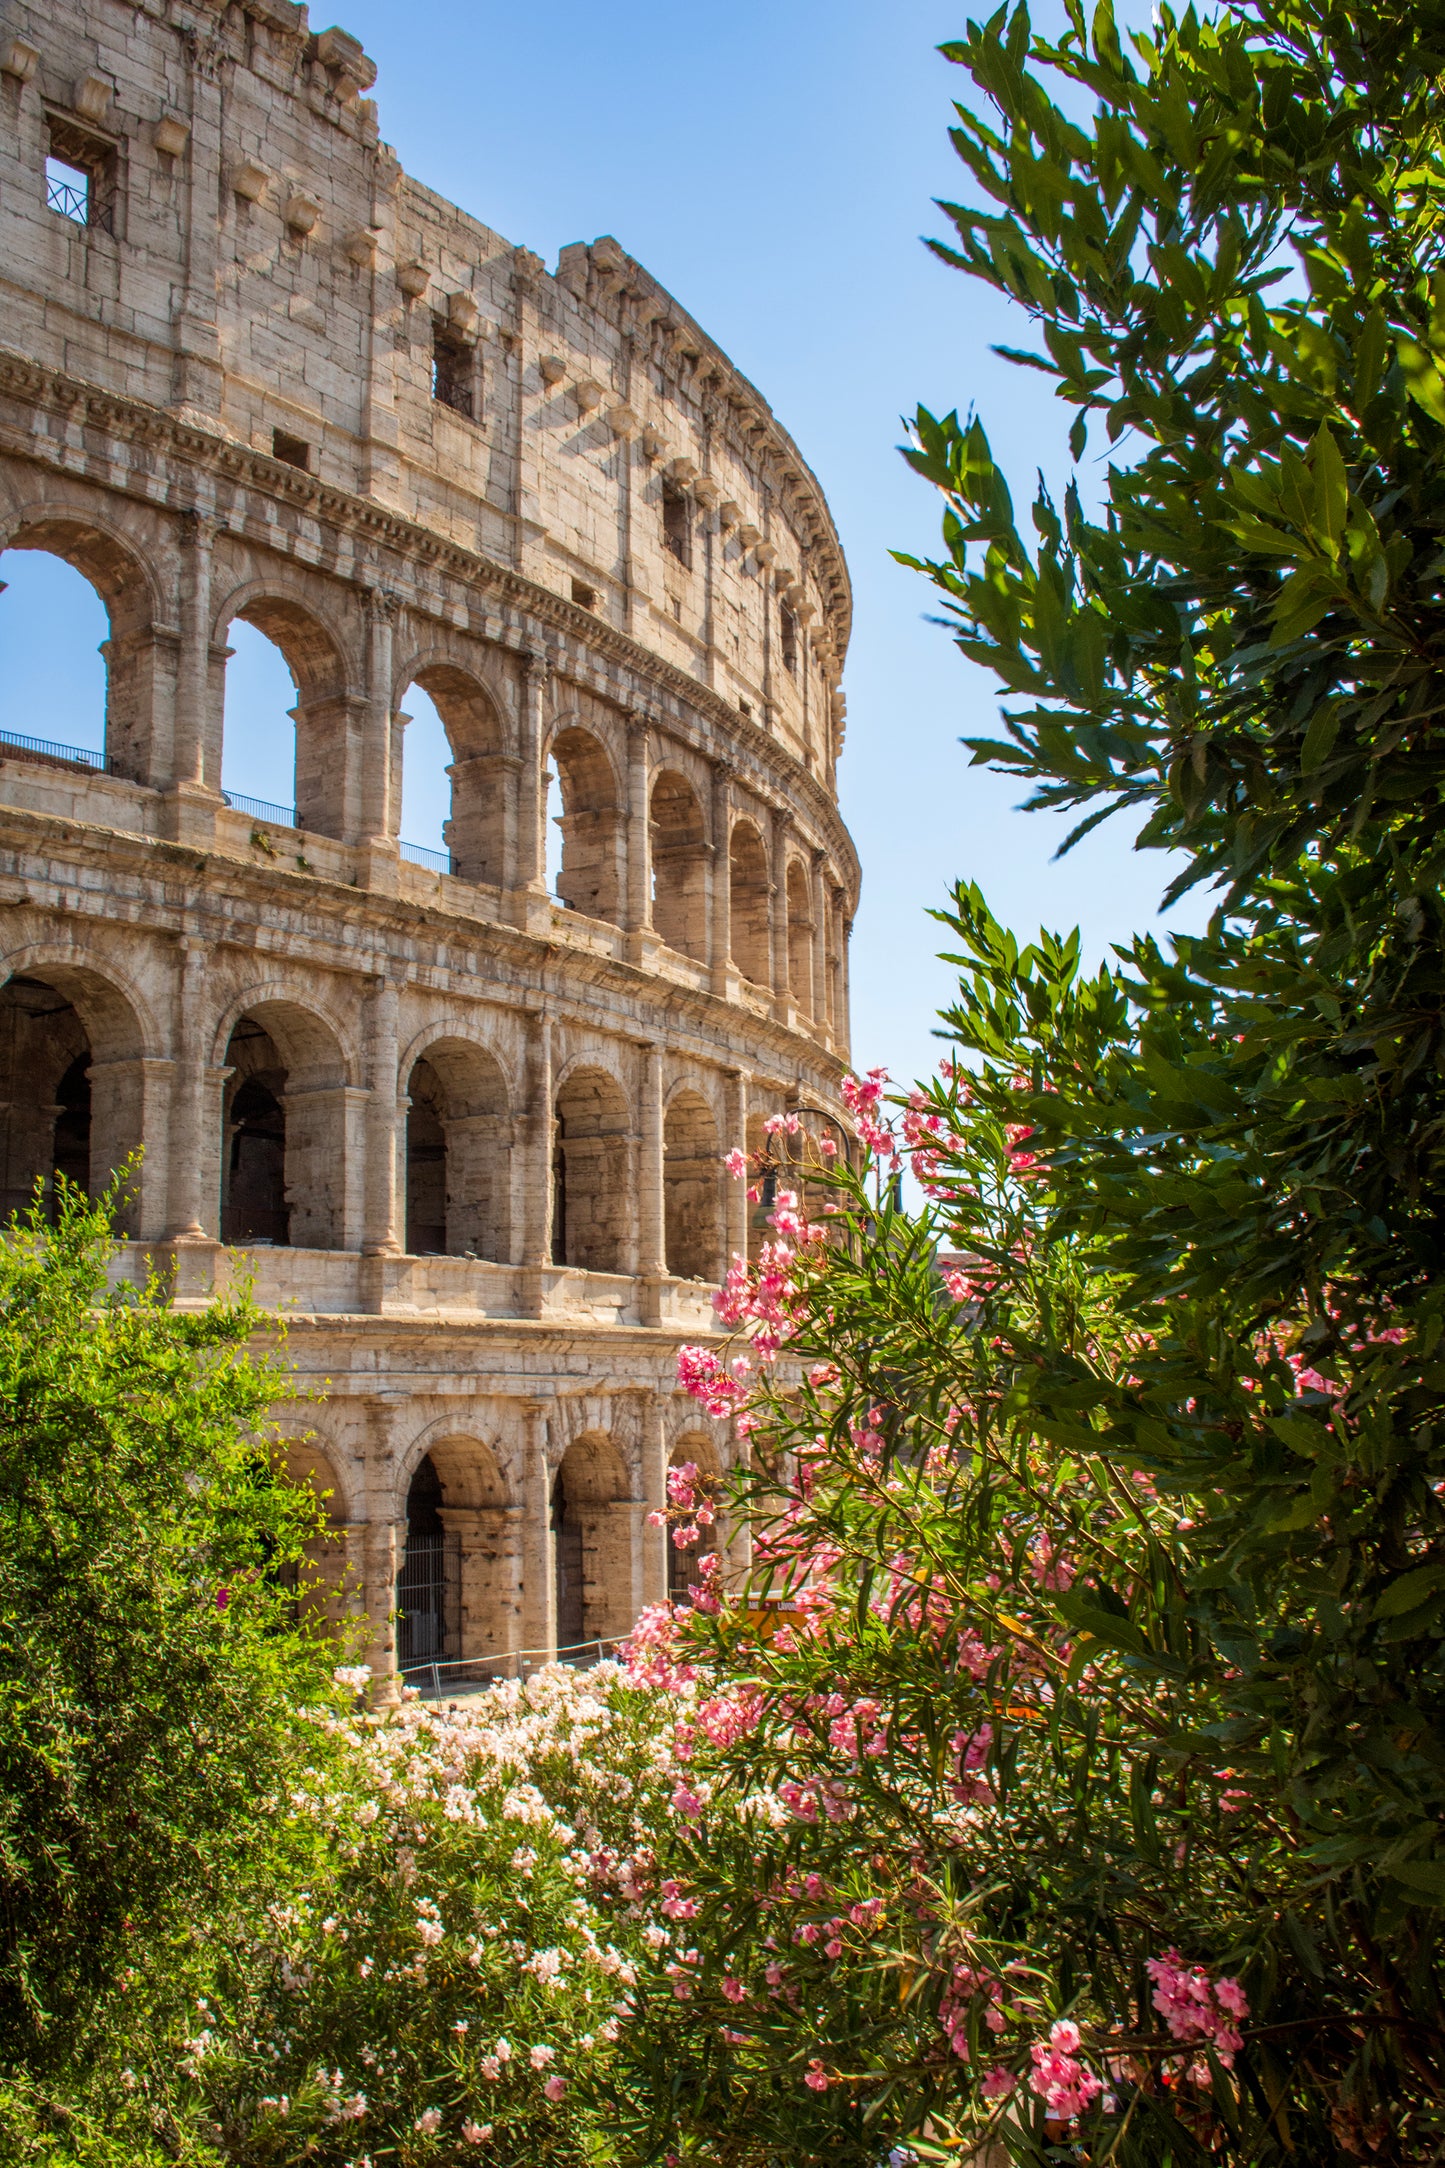 Colosseum with Flowers